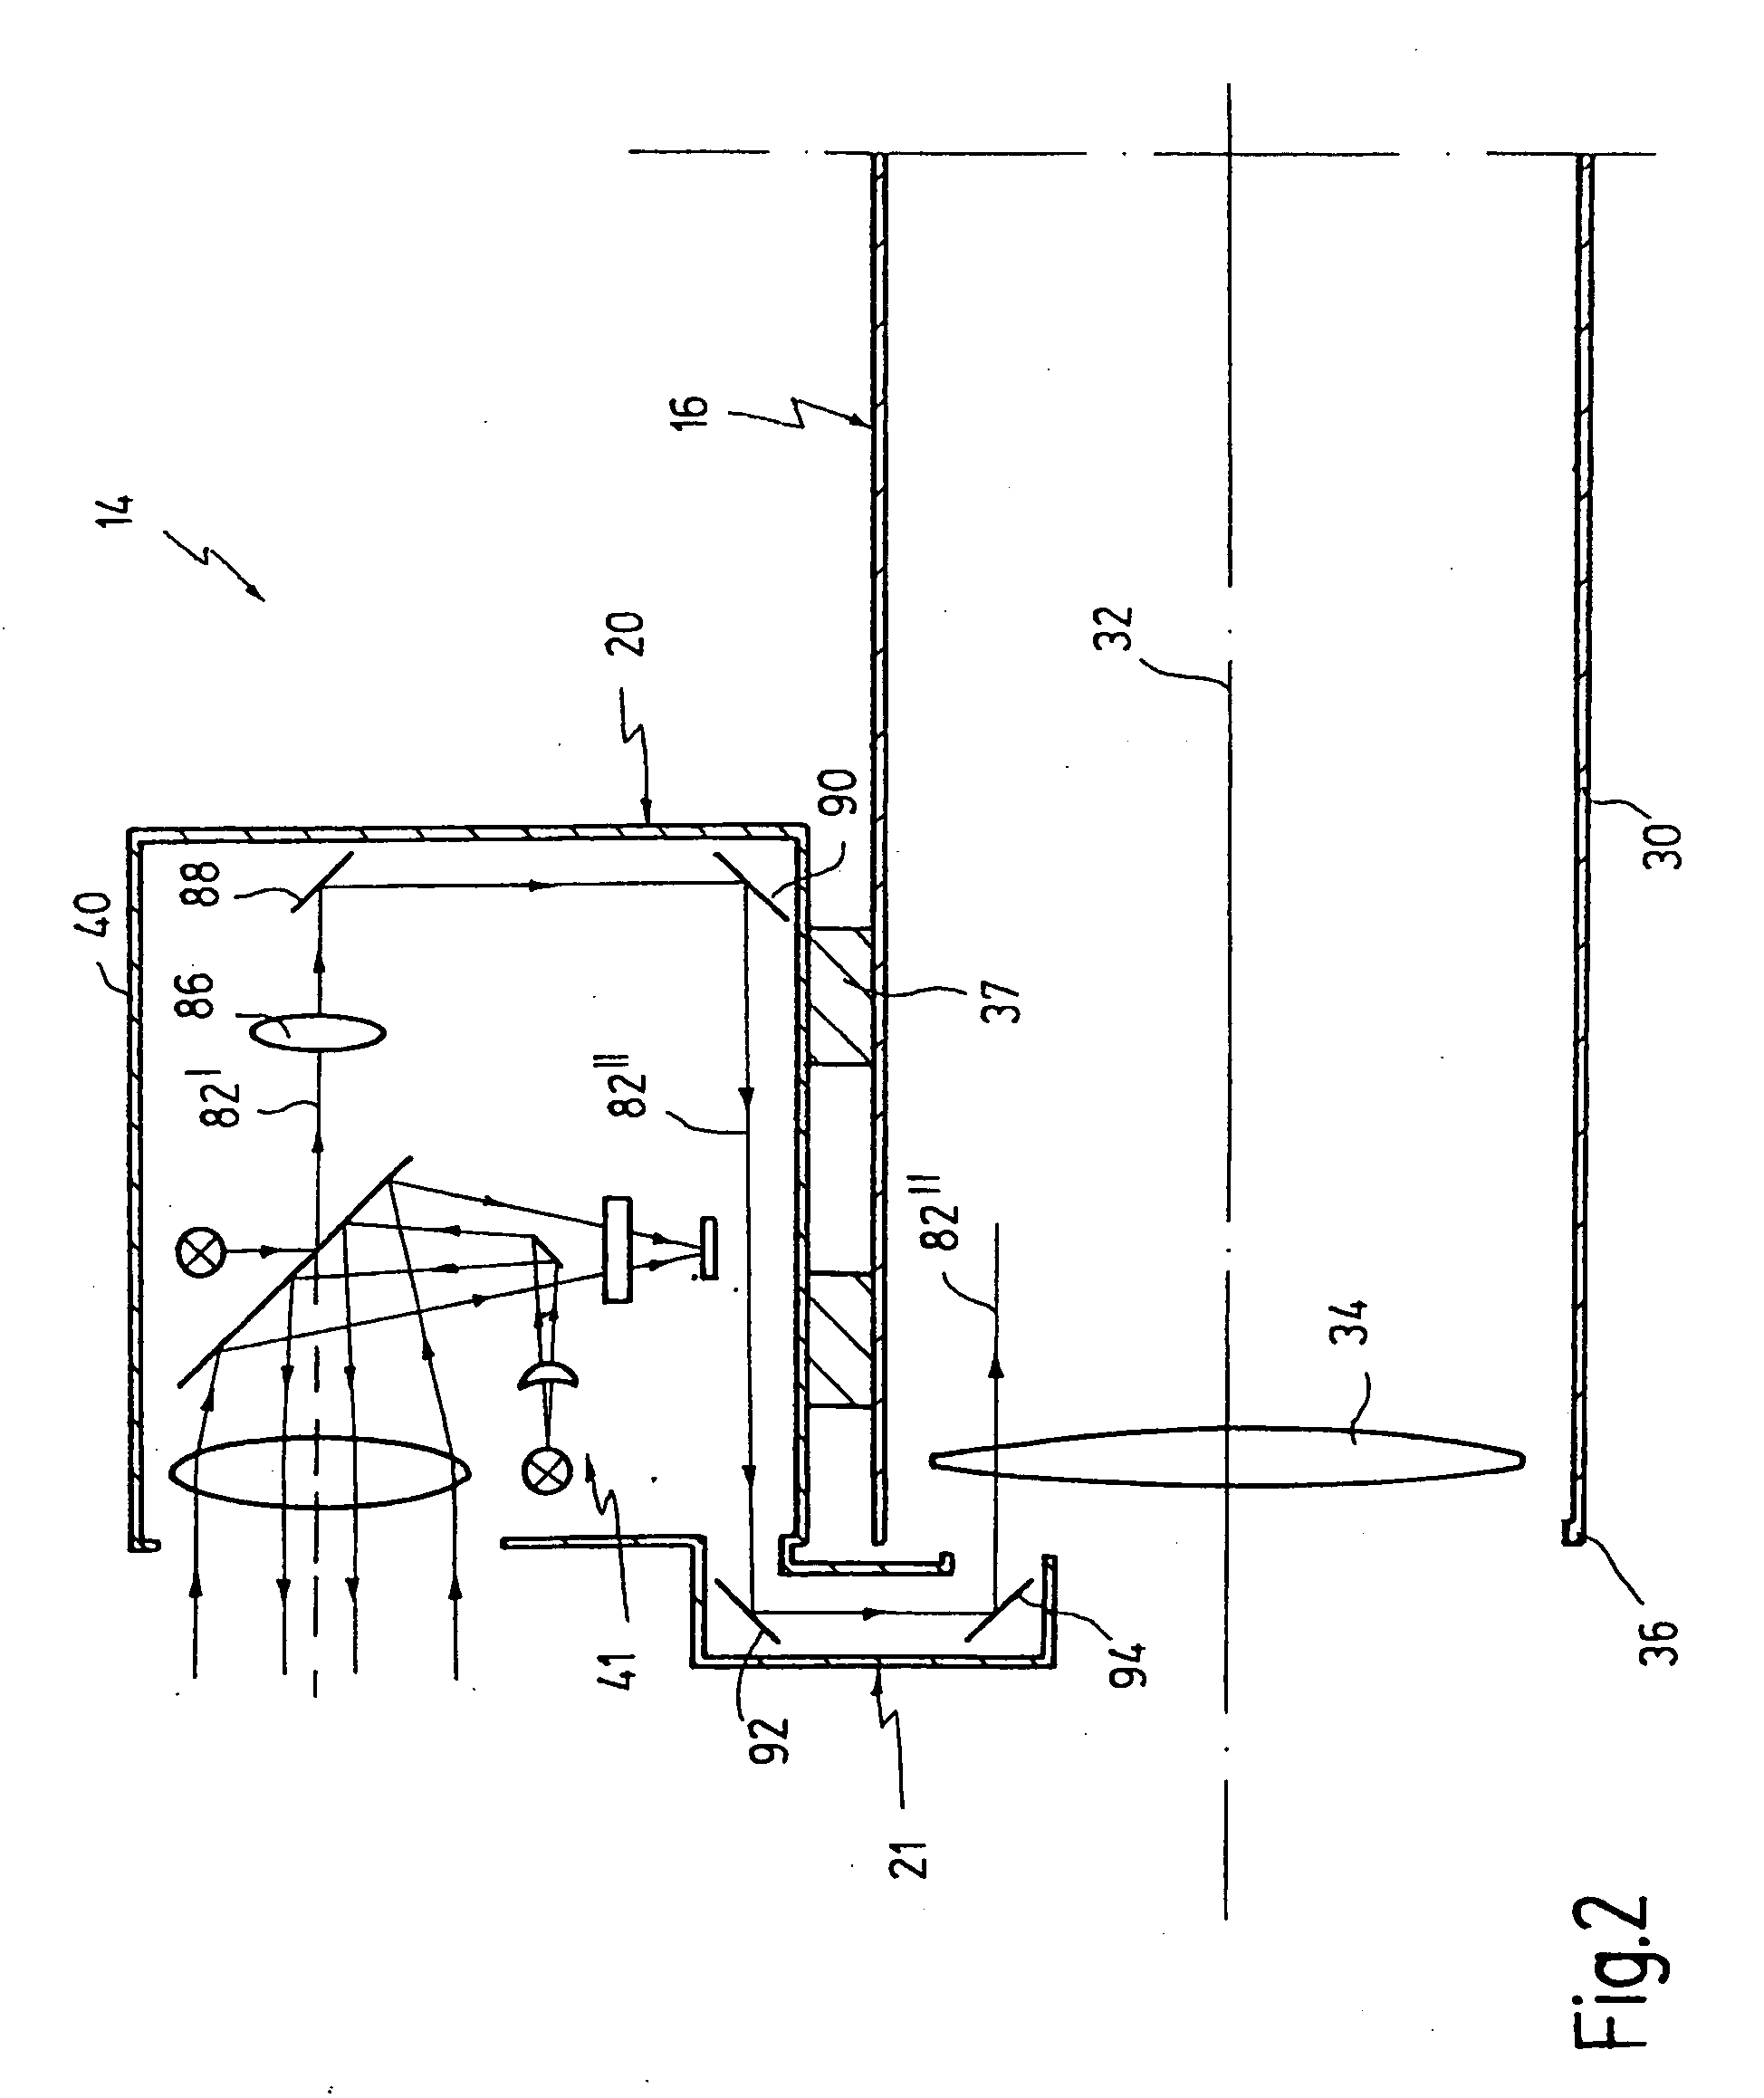 Apparatus and method for detecting optical systems in a terrain